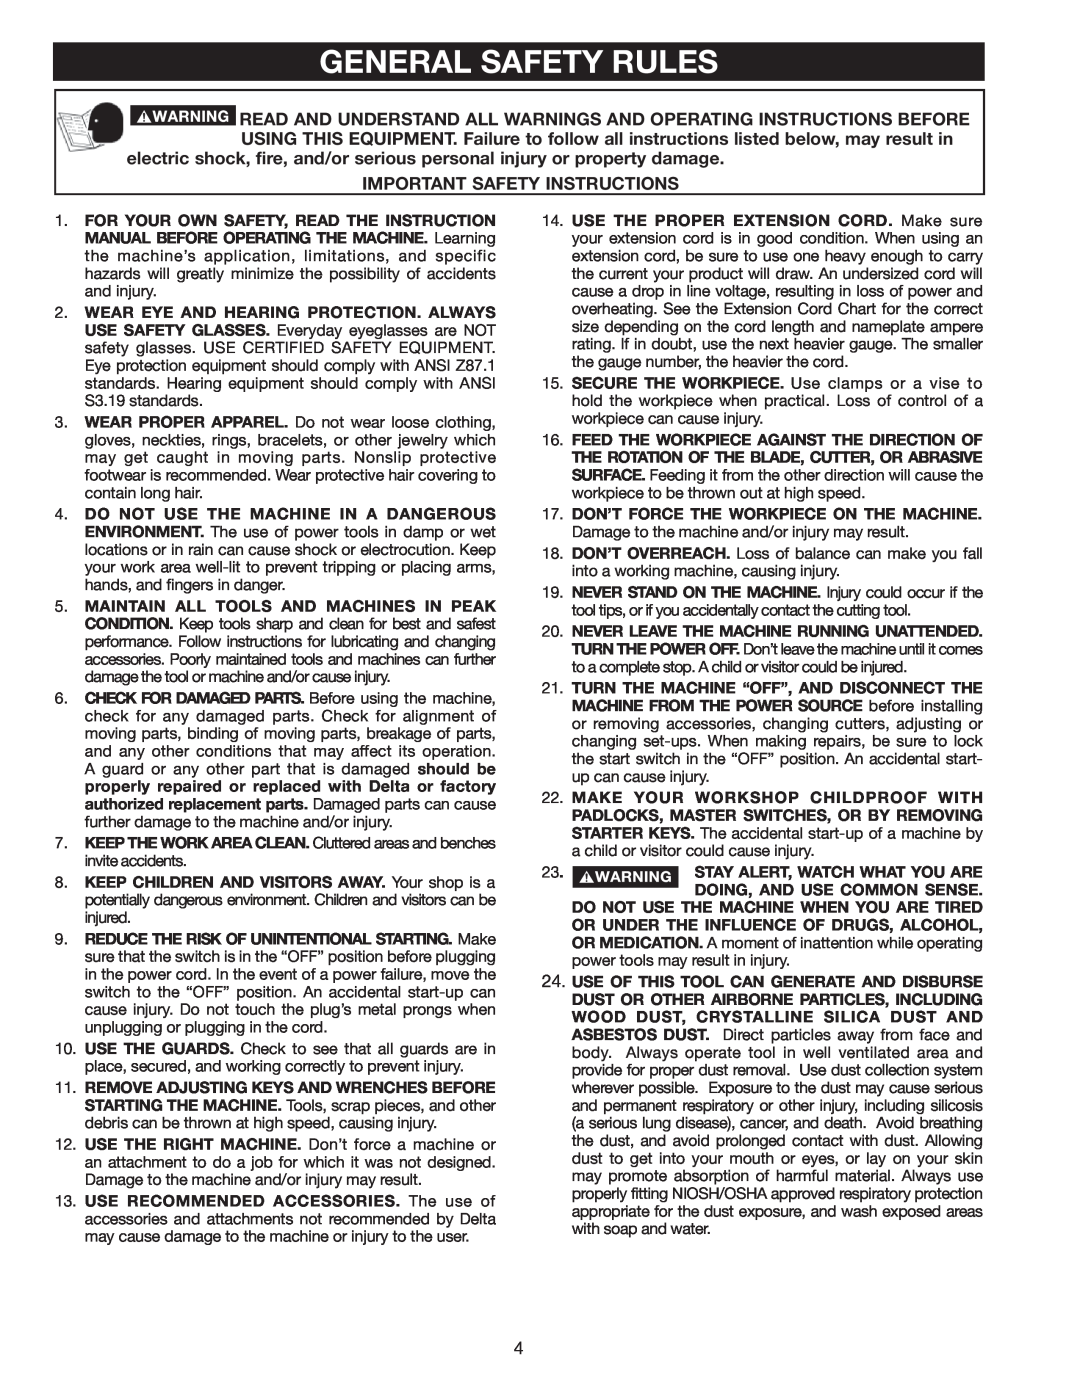 Delta 36-978 instruction manual General Safety Rules 